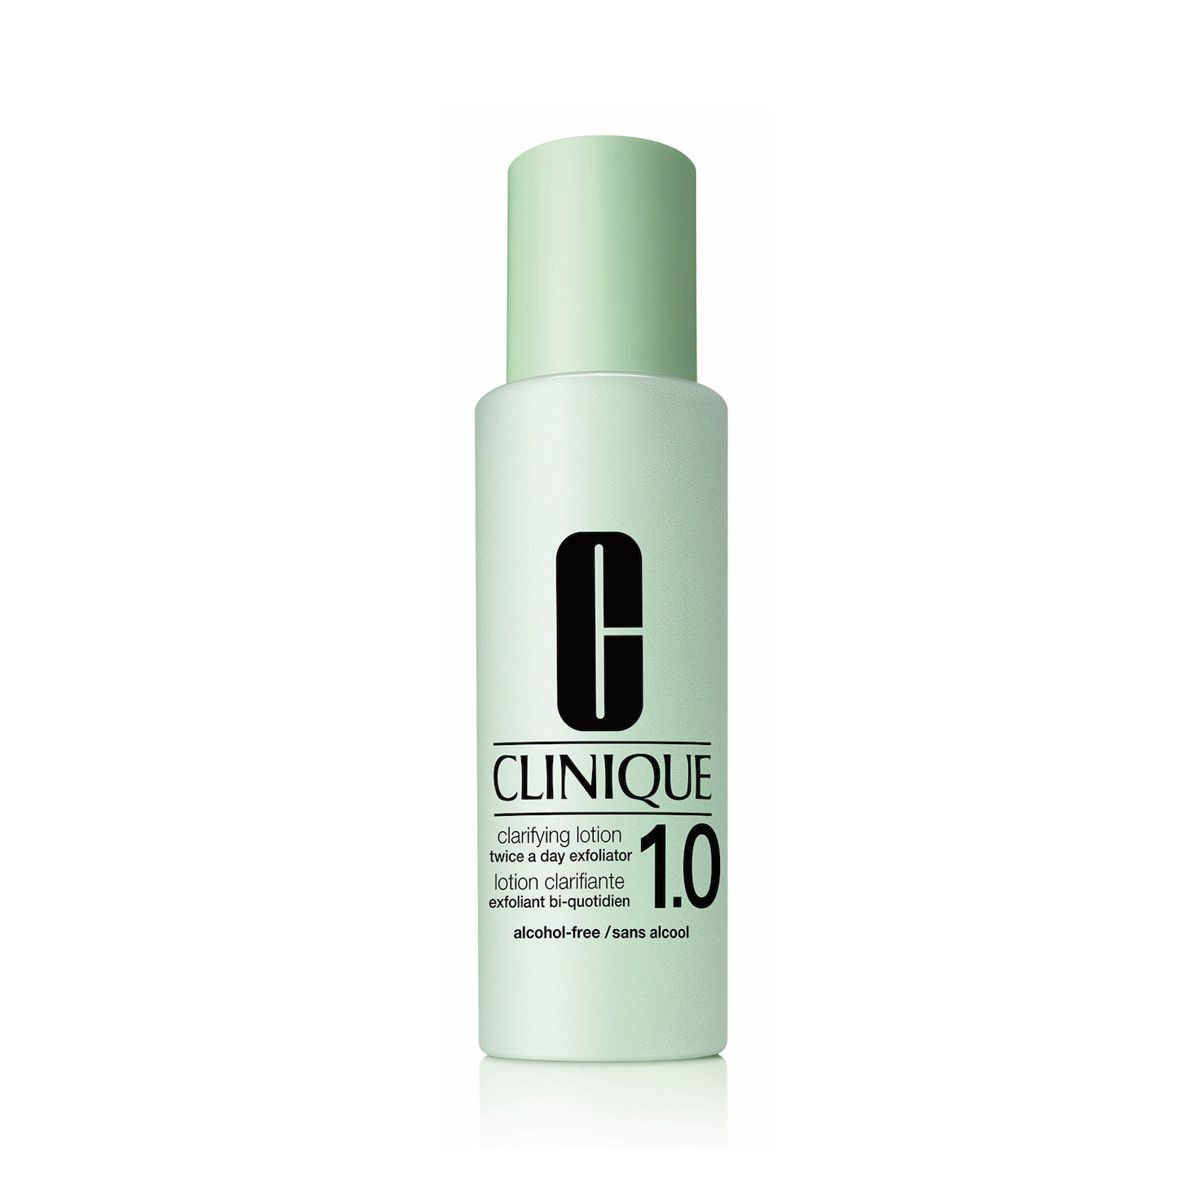 CLINIQUE 3-STEP Clarifying Lotion 1.0 400 ml